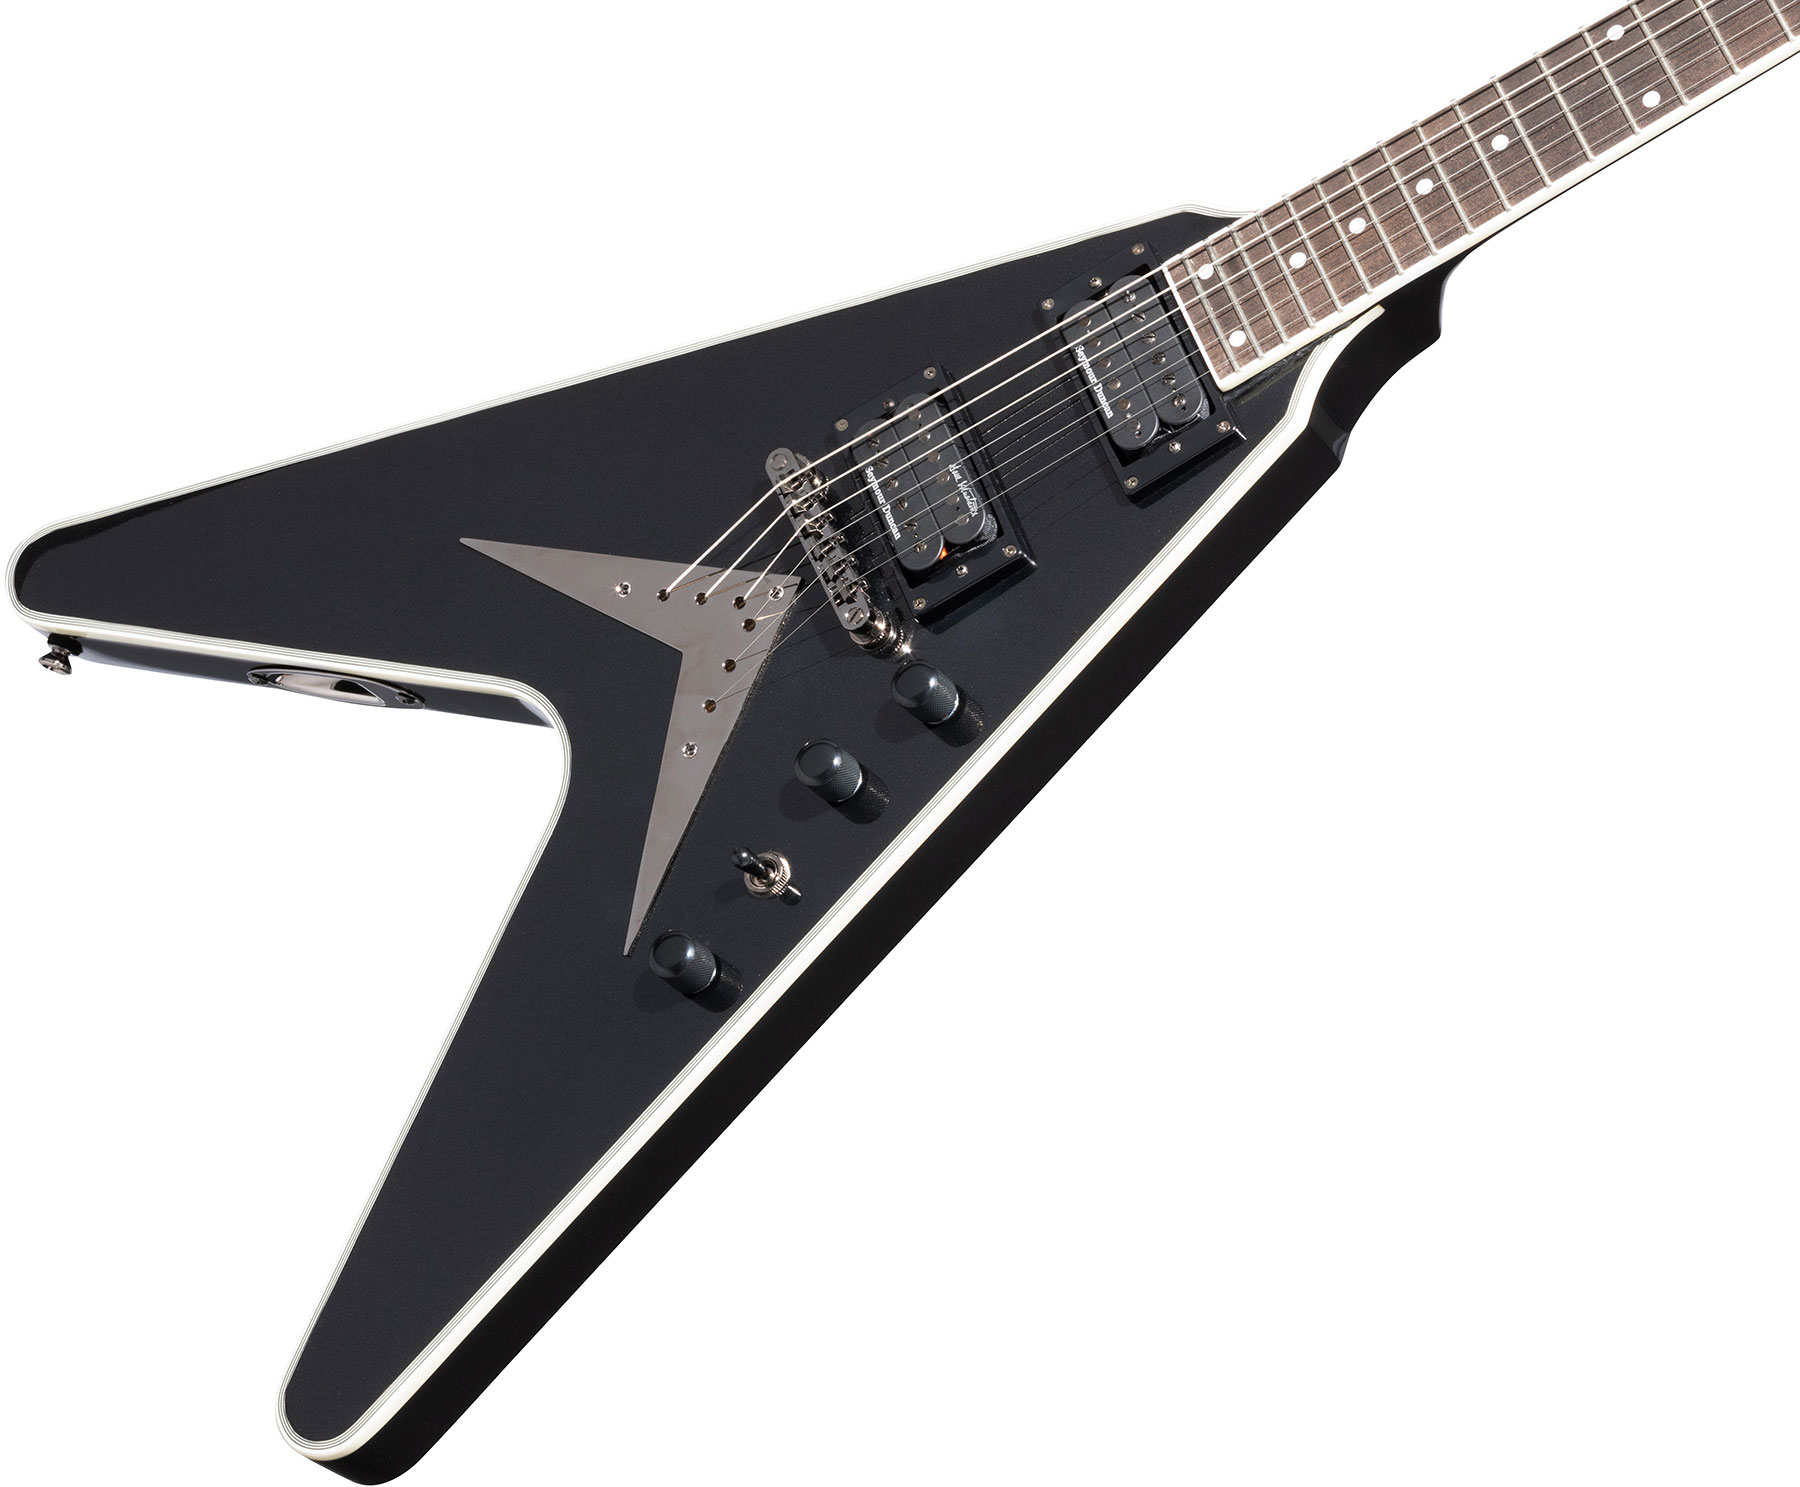 Epiphone Dave Mustaine Flying V Prophecy 2h Fishman Fluence Ht Eb - Black Metallic - Metal electric guitar - Variation 3